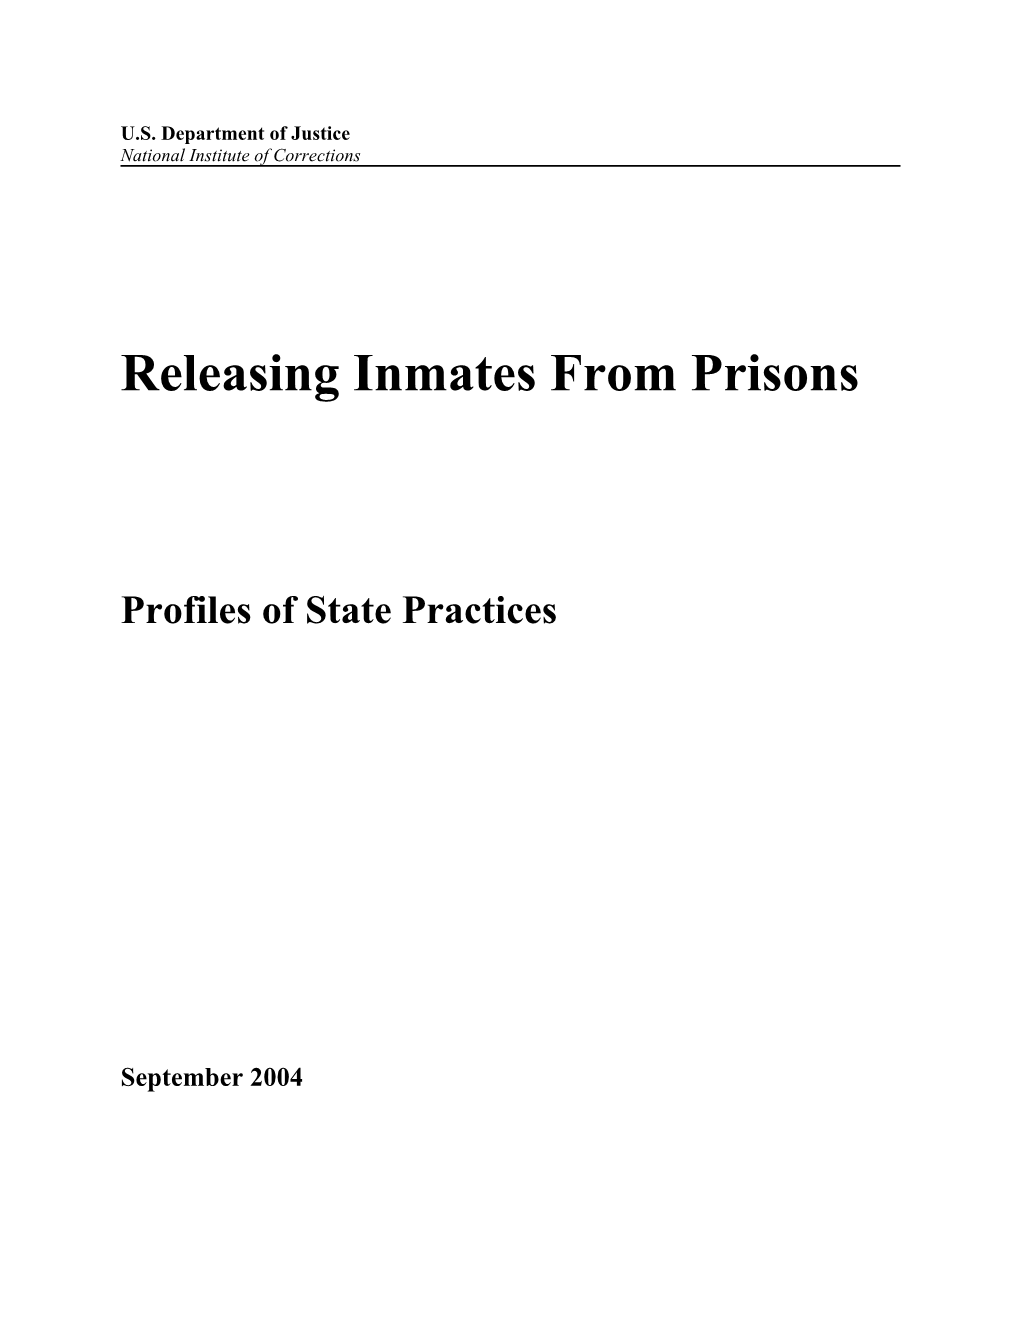 Releasing Inmates from Prisons